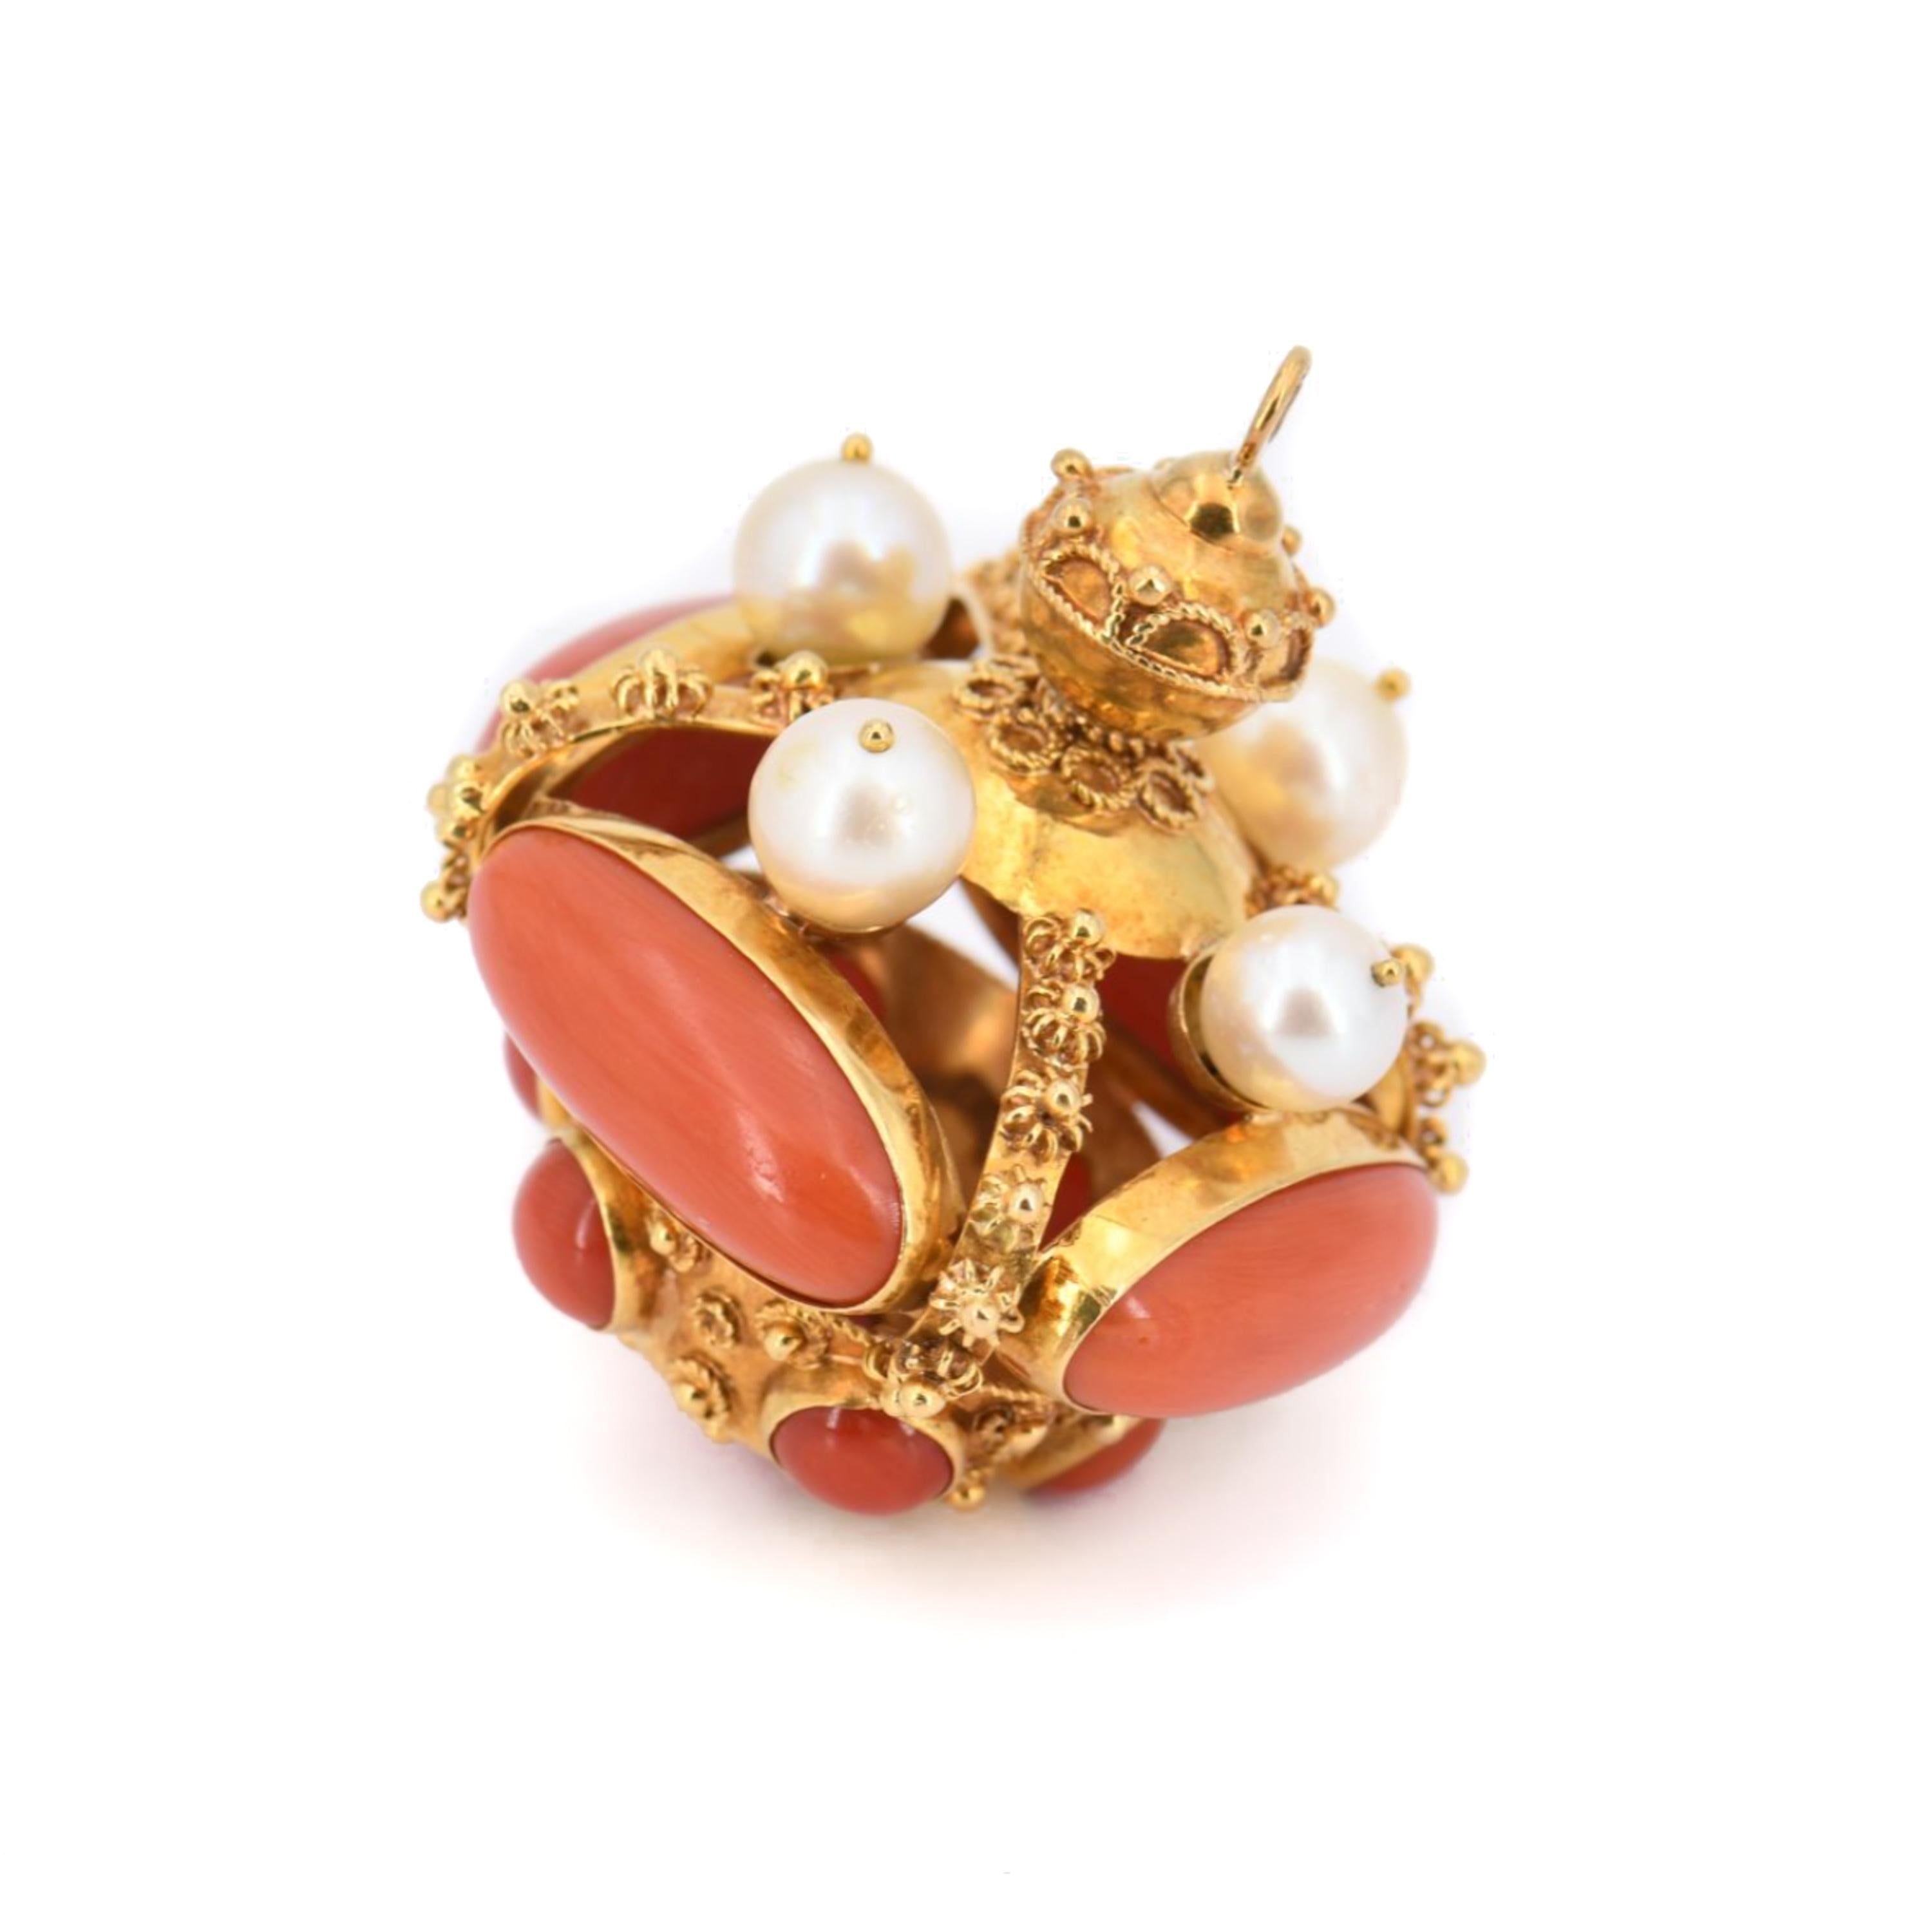 A beautiful large and heavy 18 karat gold Venetian Etruscan fob charm pendant in the shape of a crown. This Italian charm is heavily set with precious coral and cultured Akoya pearls. The gold surface is decorated with filigree, twisted wire-work